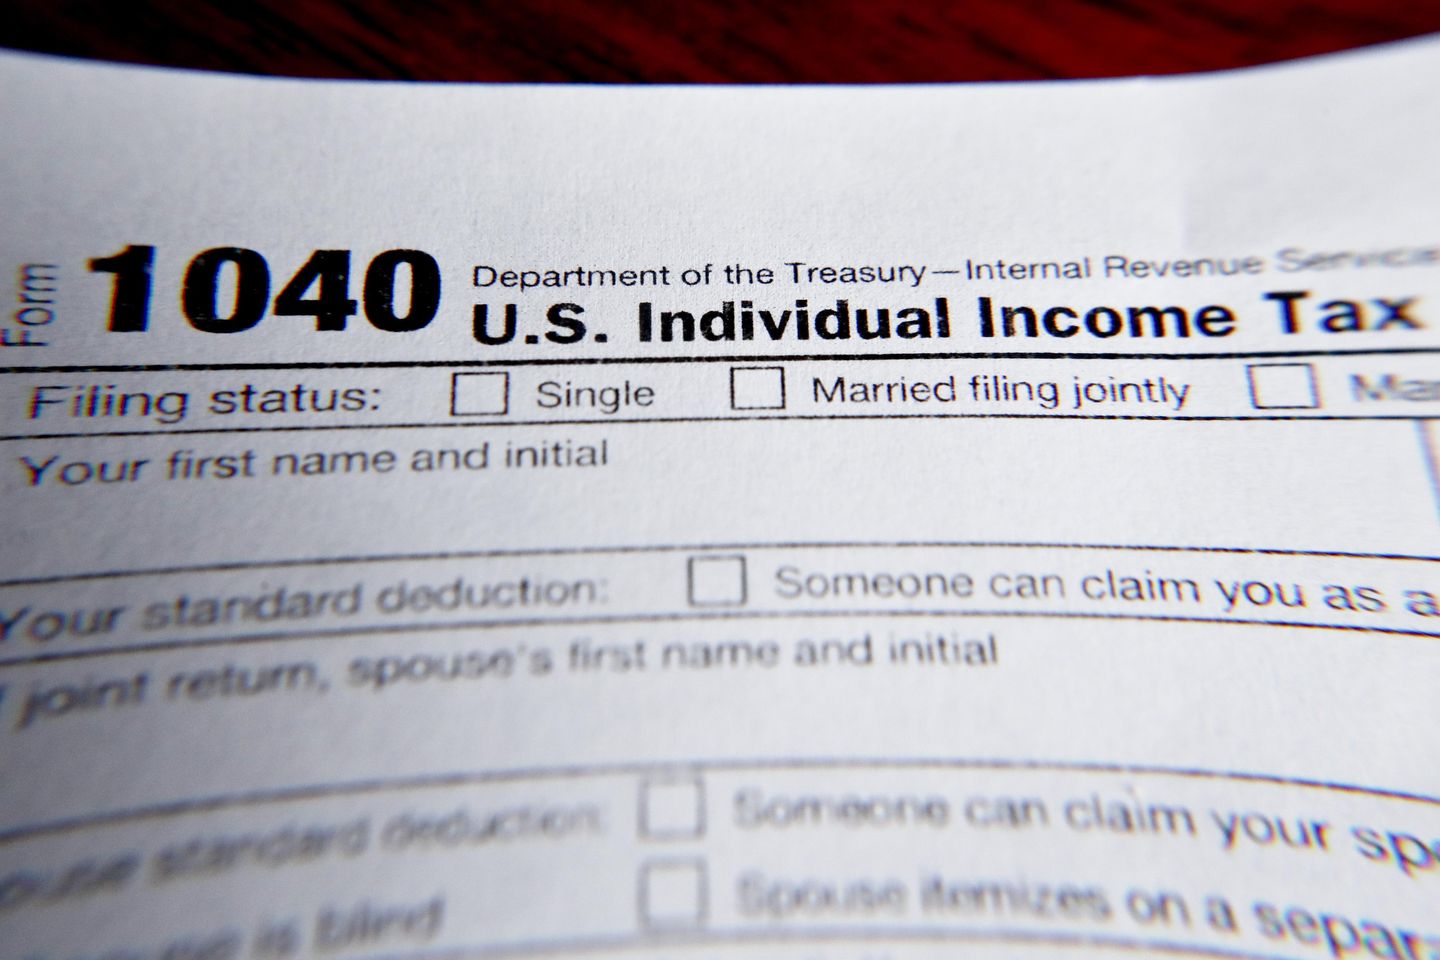 IRS braces for flood of tax-day returns, as taxpayers see delayed refunds amid backlog